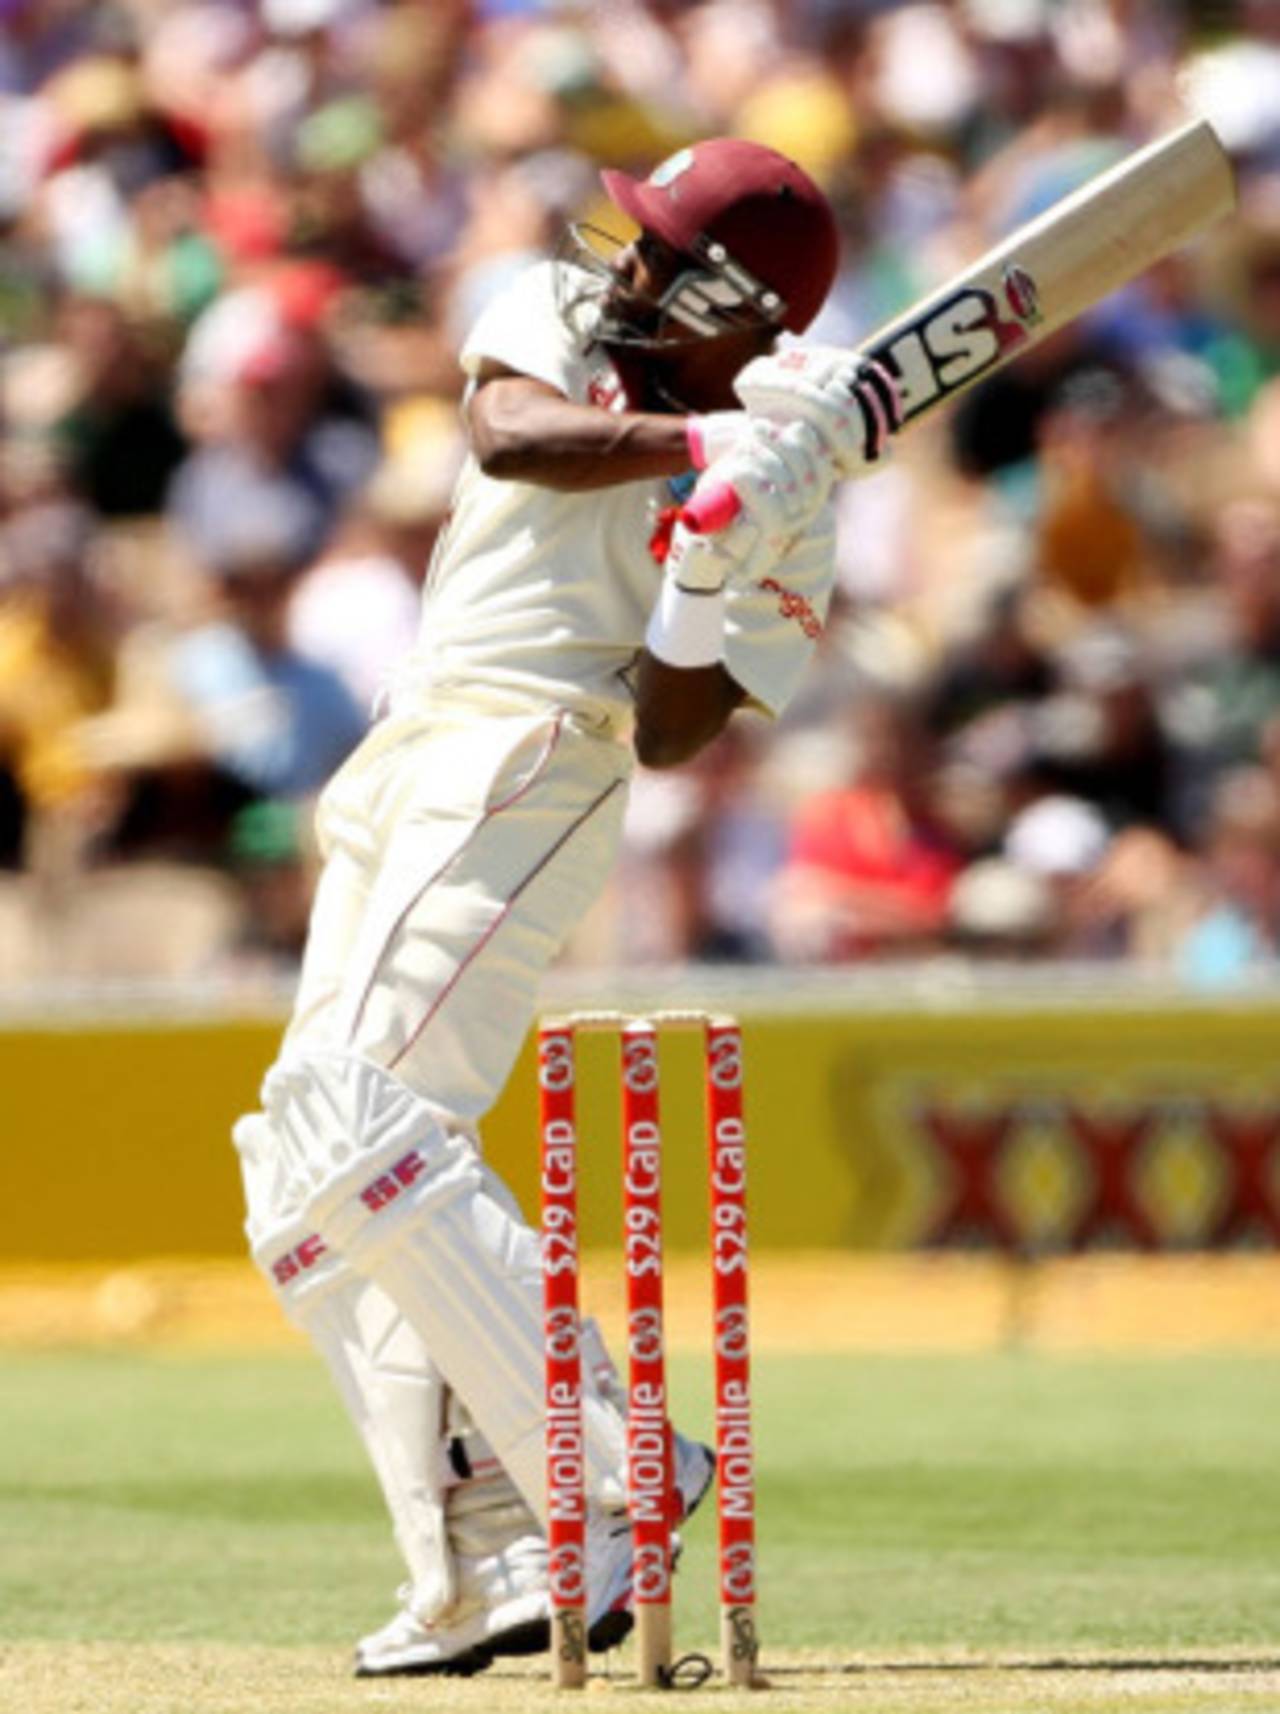 Dwayne Bravo took risks and entertained during a vital innings for his under-pressure side&nbsp;&nbsp;&bull;&nbsp;&nbsp;Getty Images